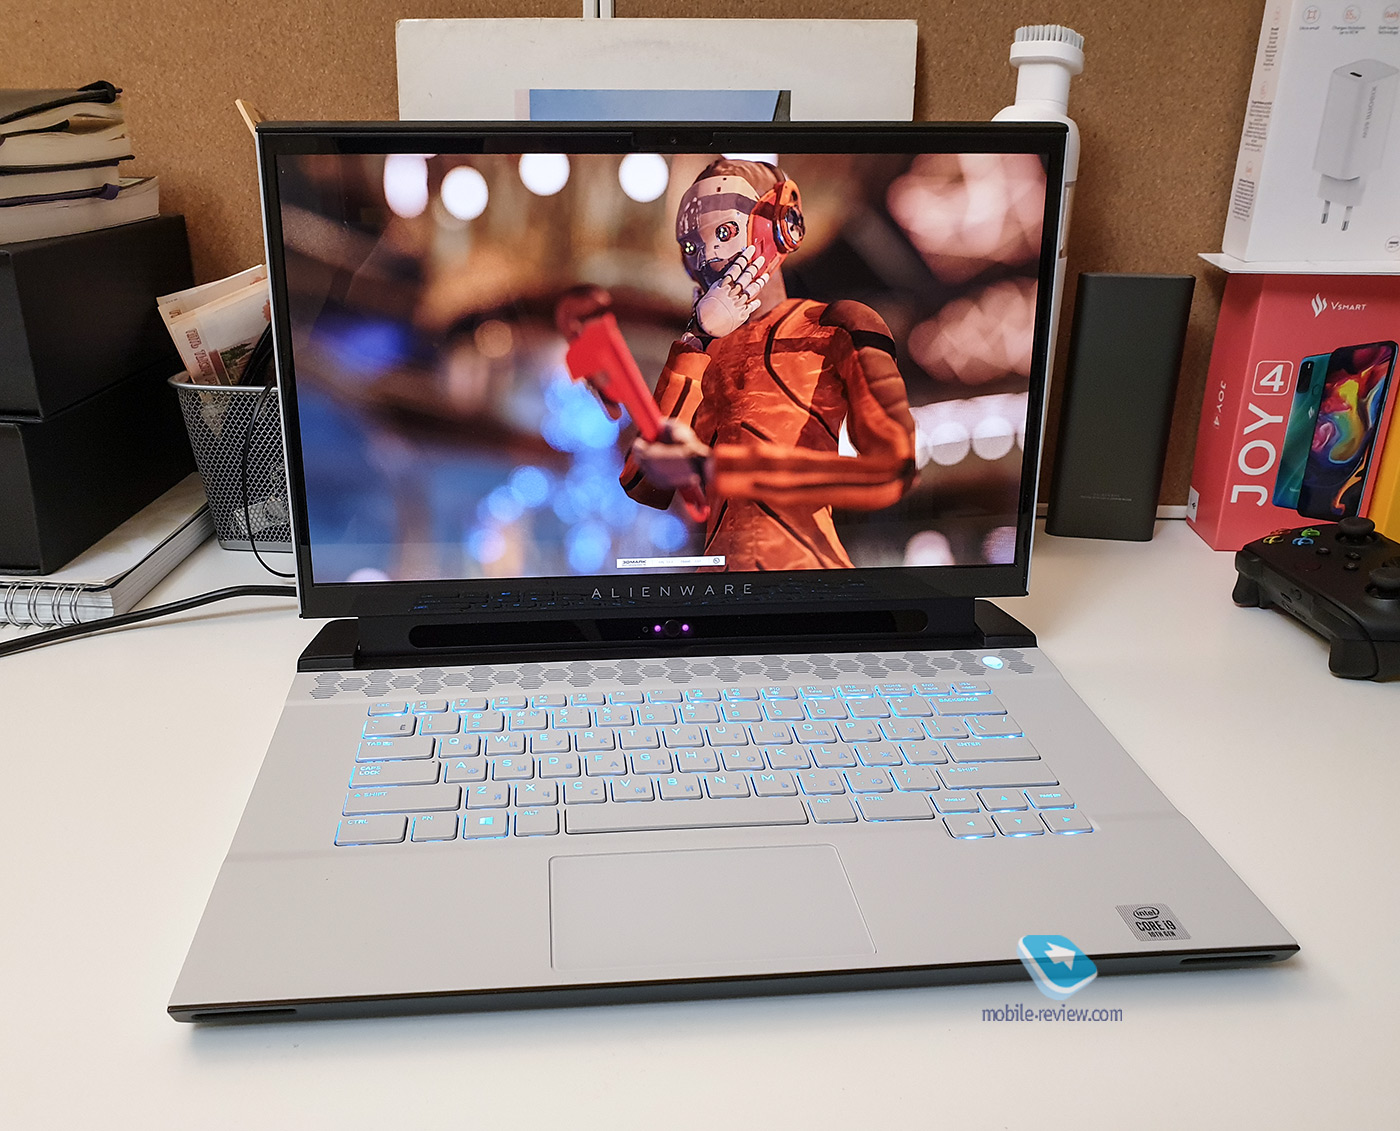 Dell Alienware m15 R3 review: OLED screen and GeForce RTX 2080